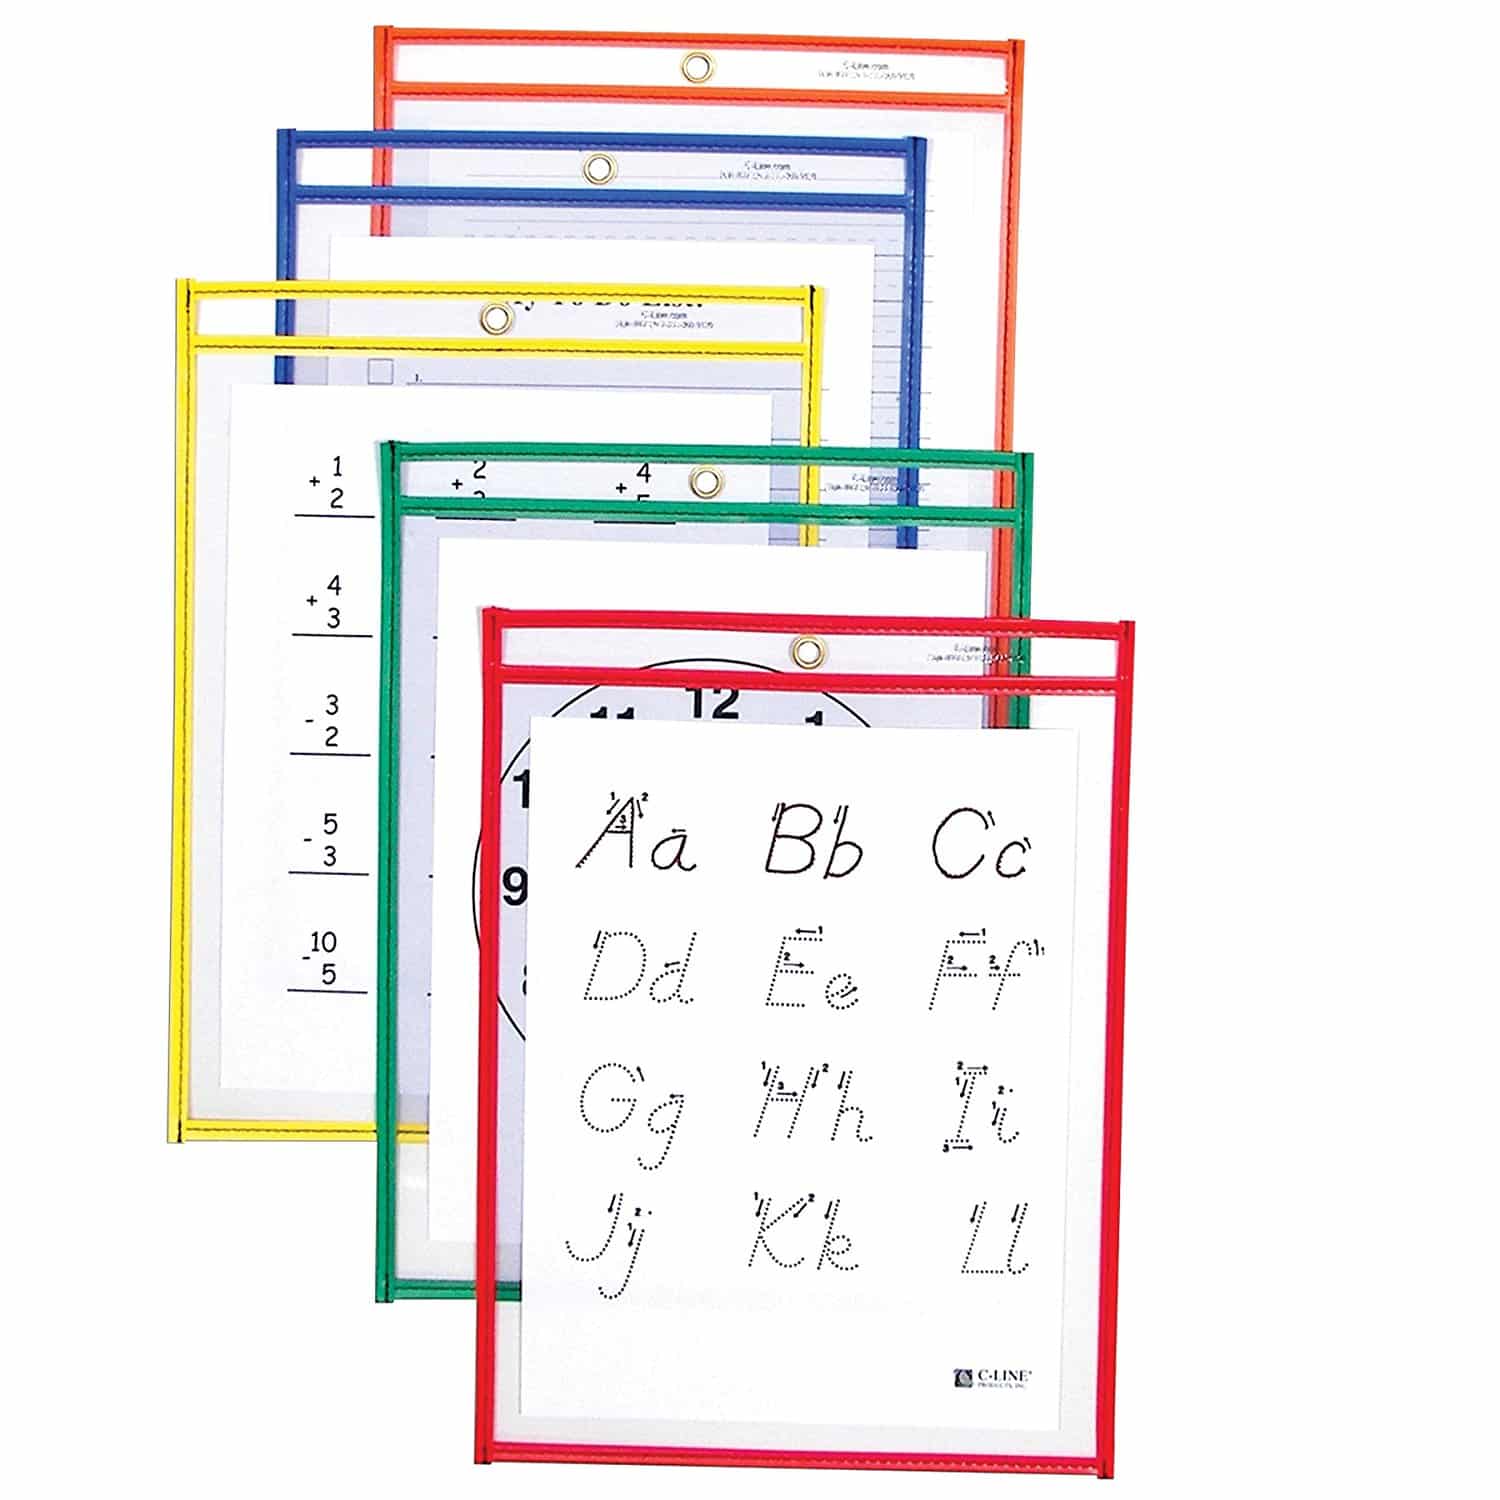 LIGHTNING DEAL ALERT! Reusable Dry Erase Pockets, 9 x 12 Inches, Assorted Primary Colors, 5 Pockets per Pack – 40% off!